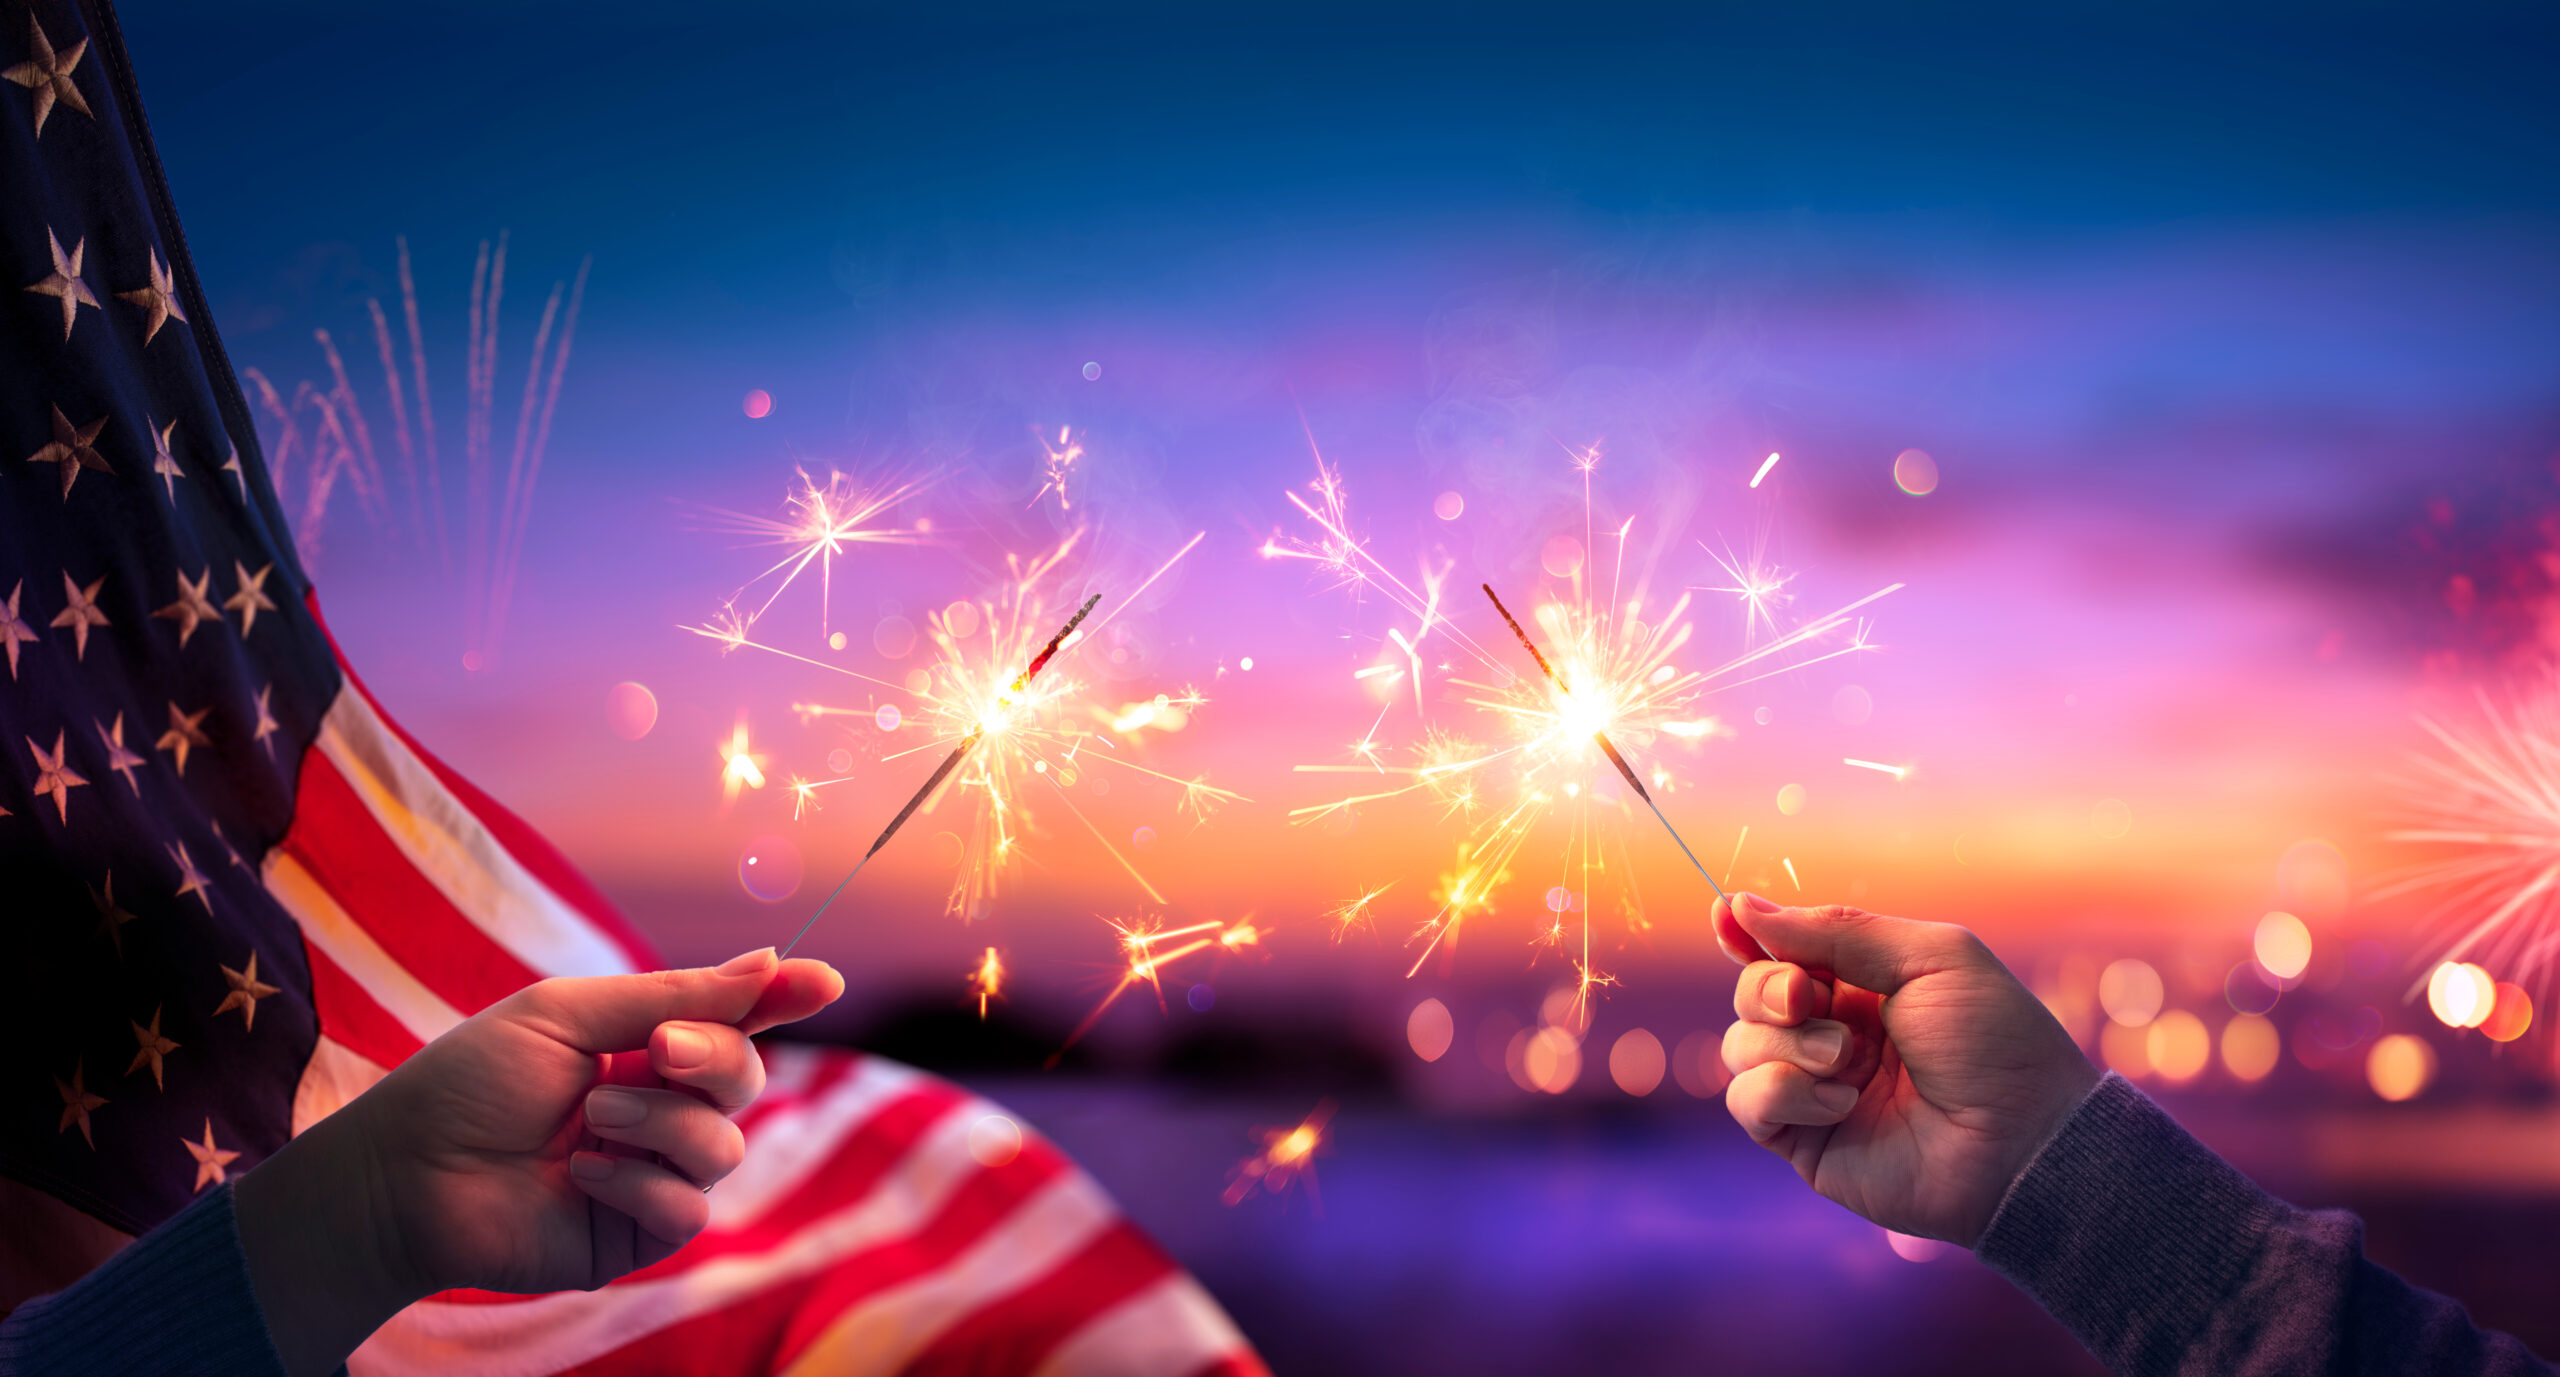 Usa,Celebration,With,Hands,Holding,Sparklers,And,American,Flag,At